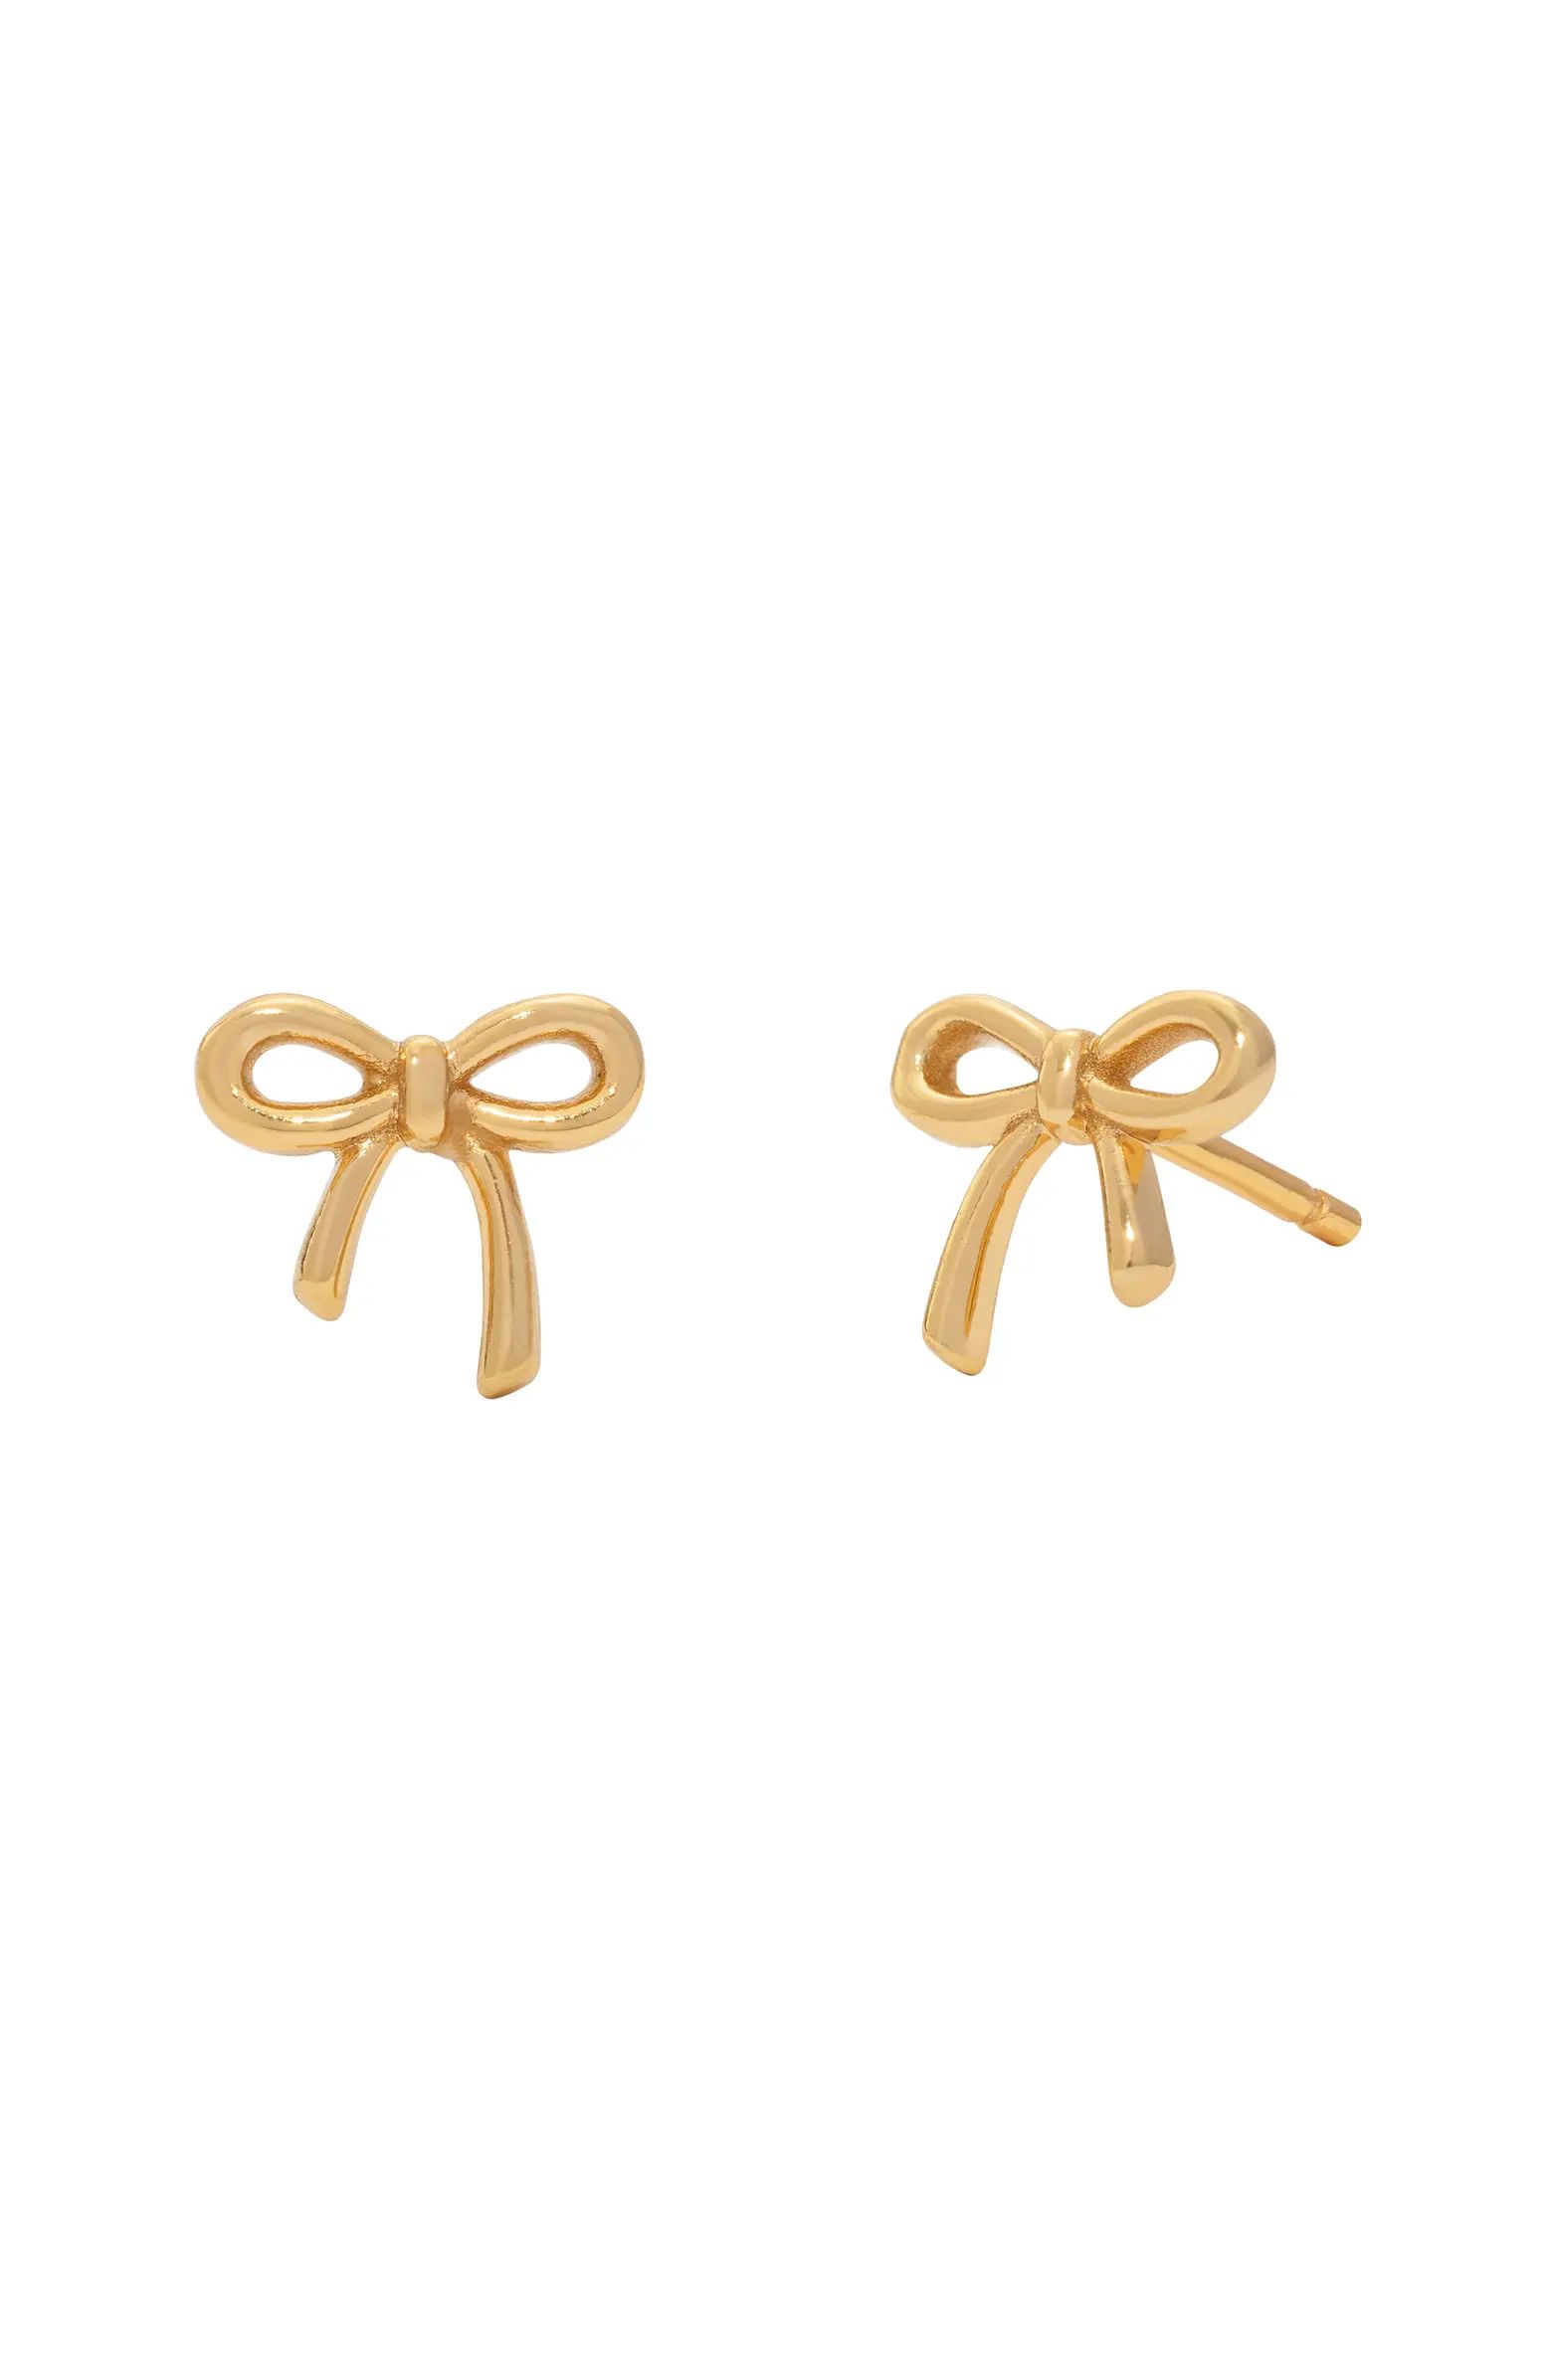 MADE BY MARY Bow Stud Earrings | Nordstrom | Nordstrom